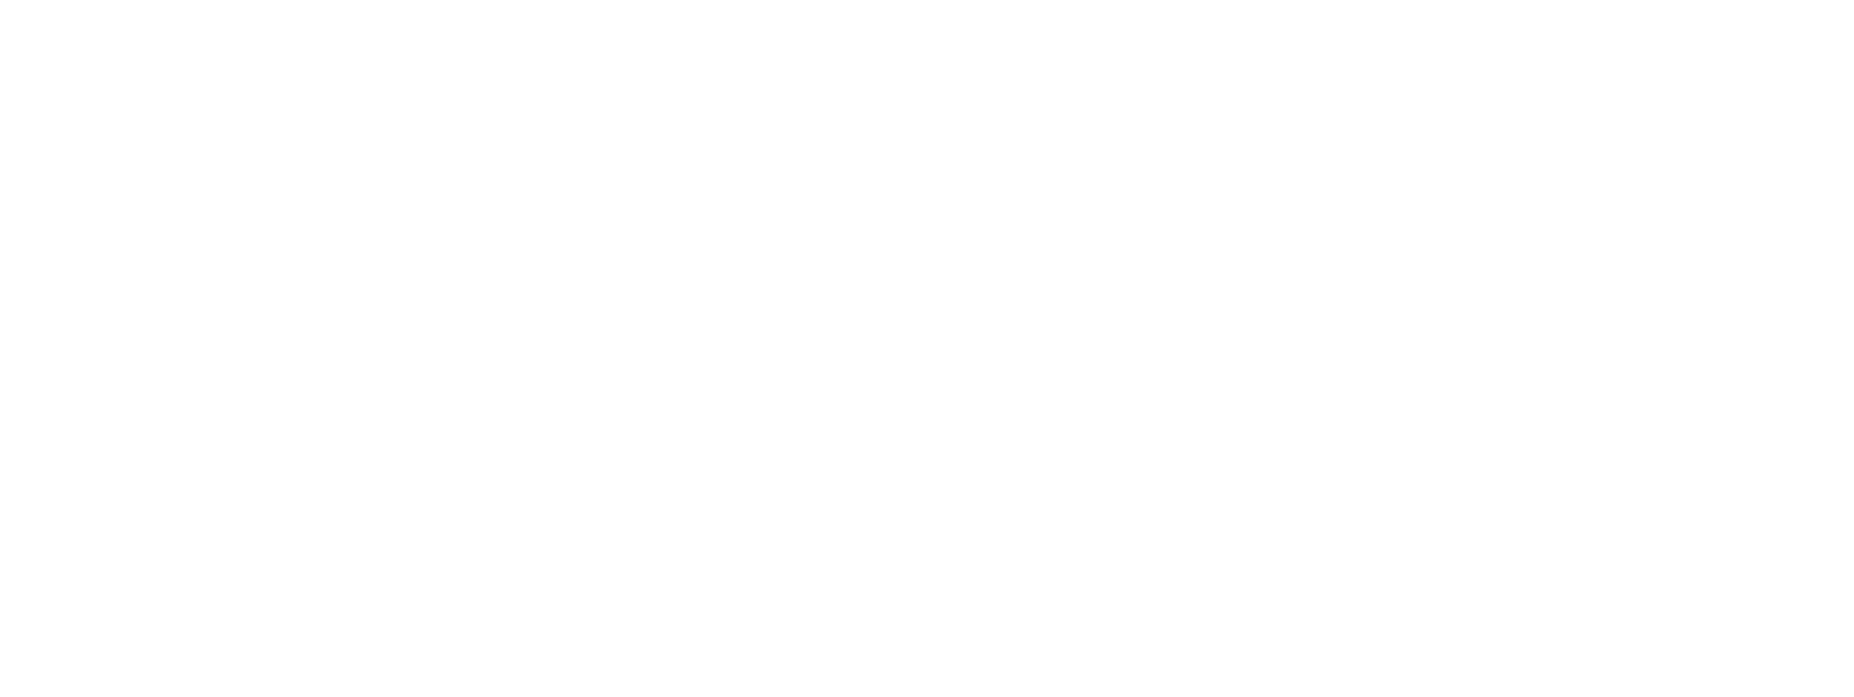 Nordic Executive Partners logo Inverted